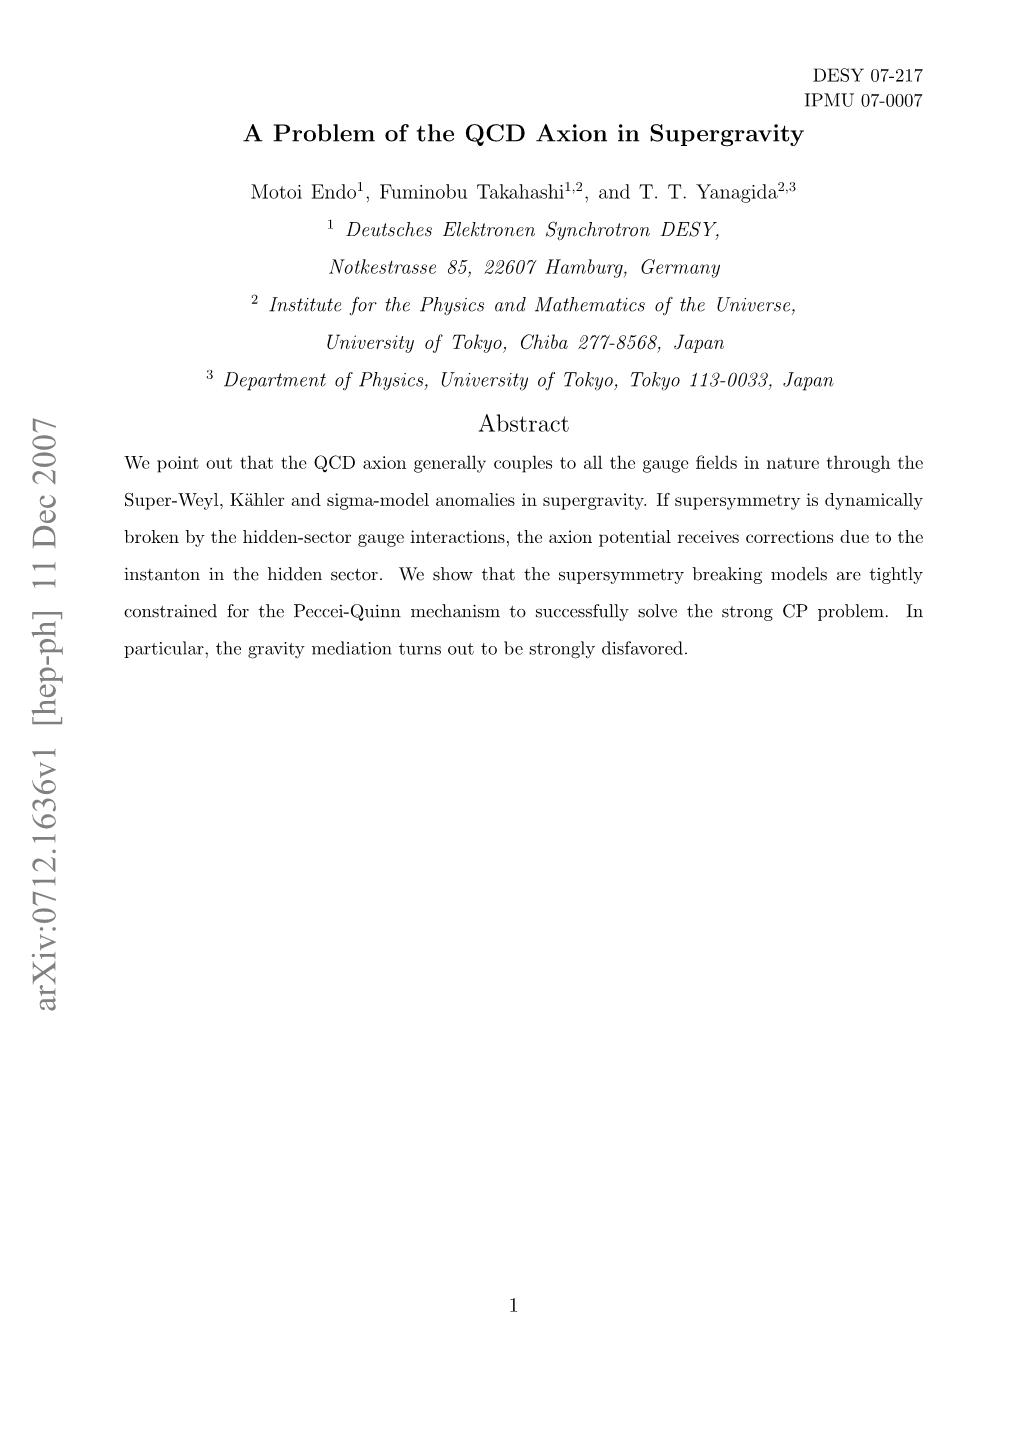 A Problem of the QCD Axion in Supergravity